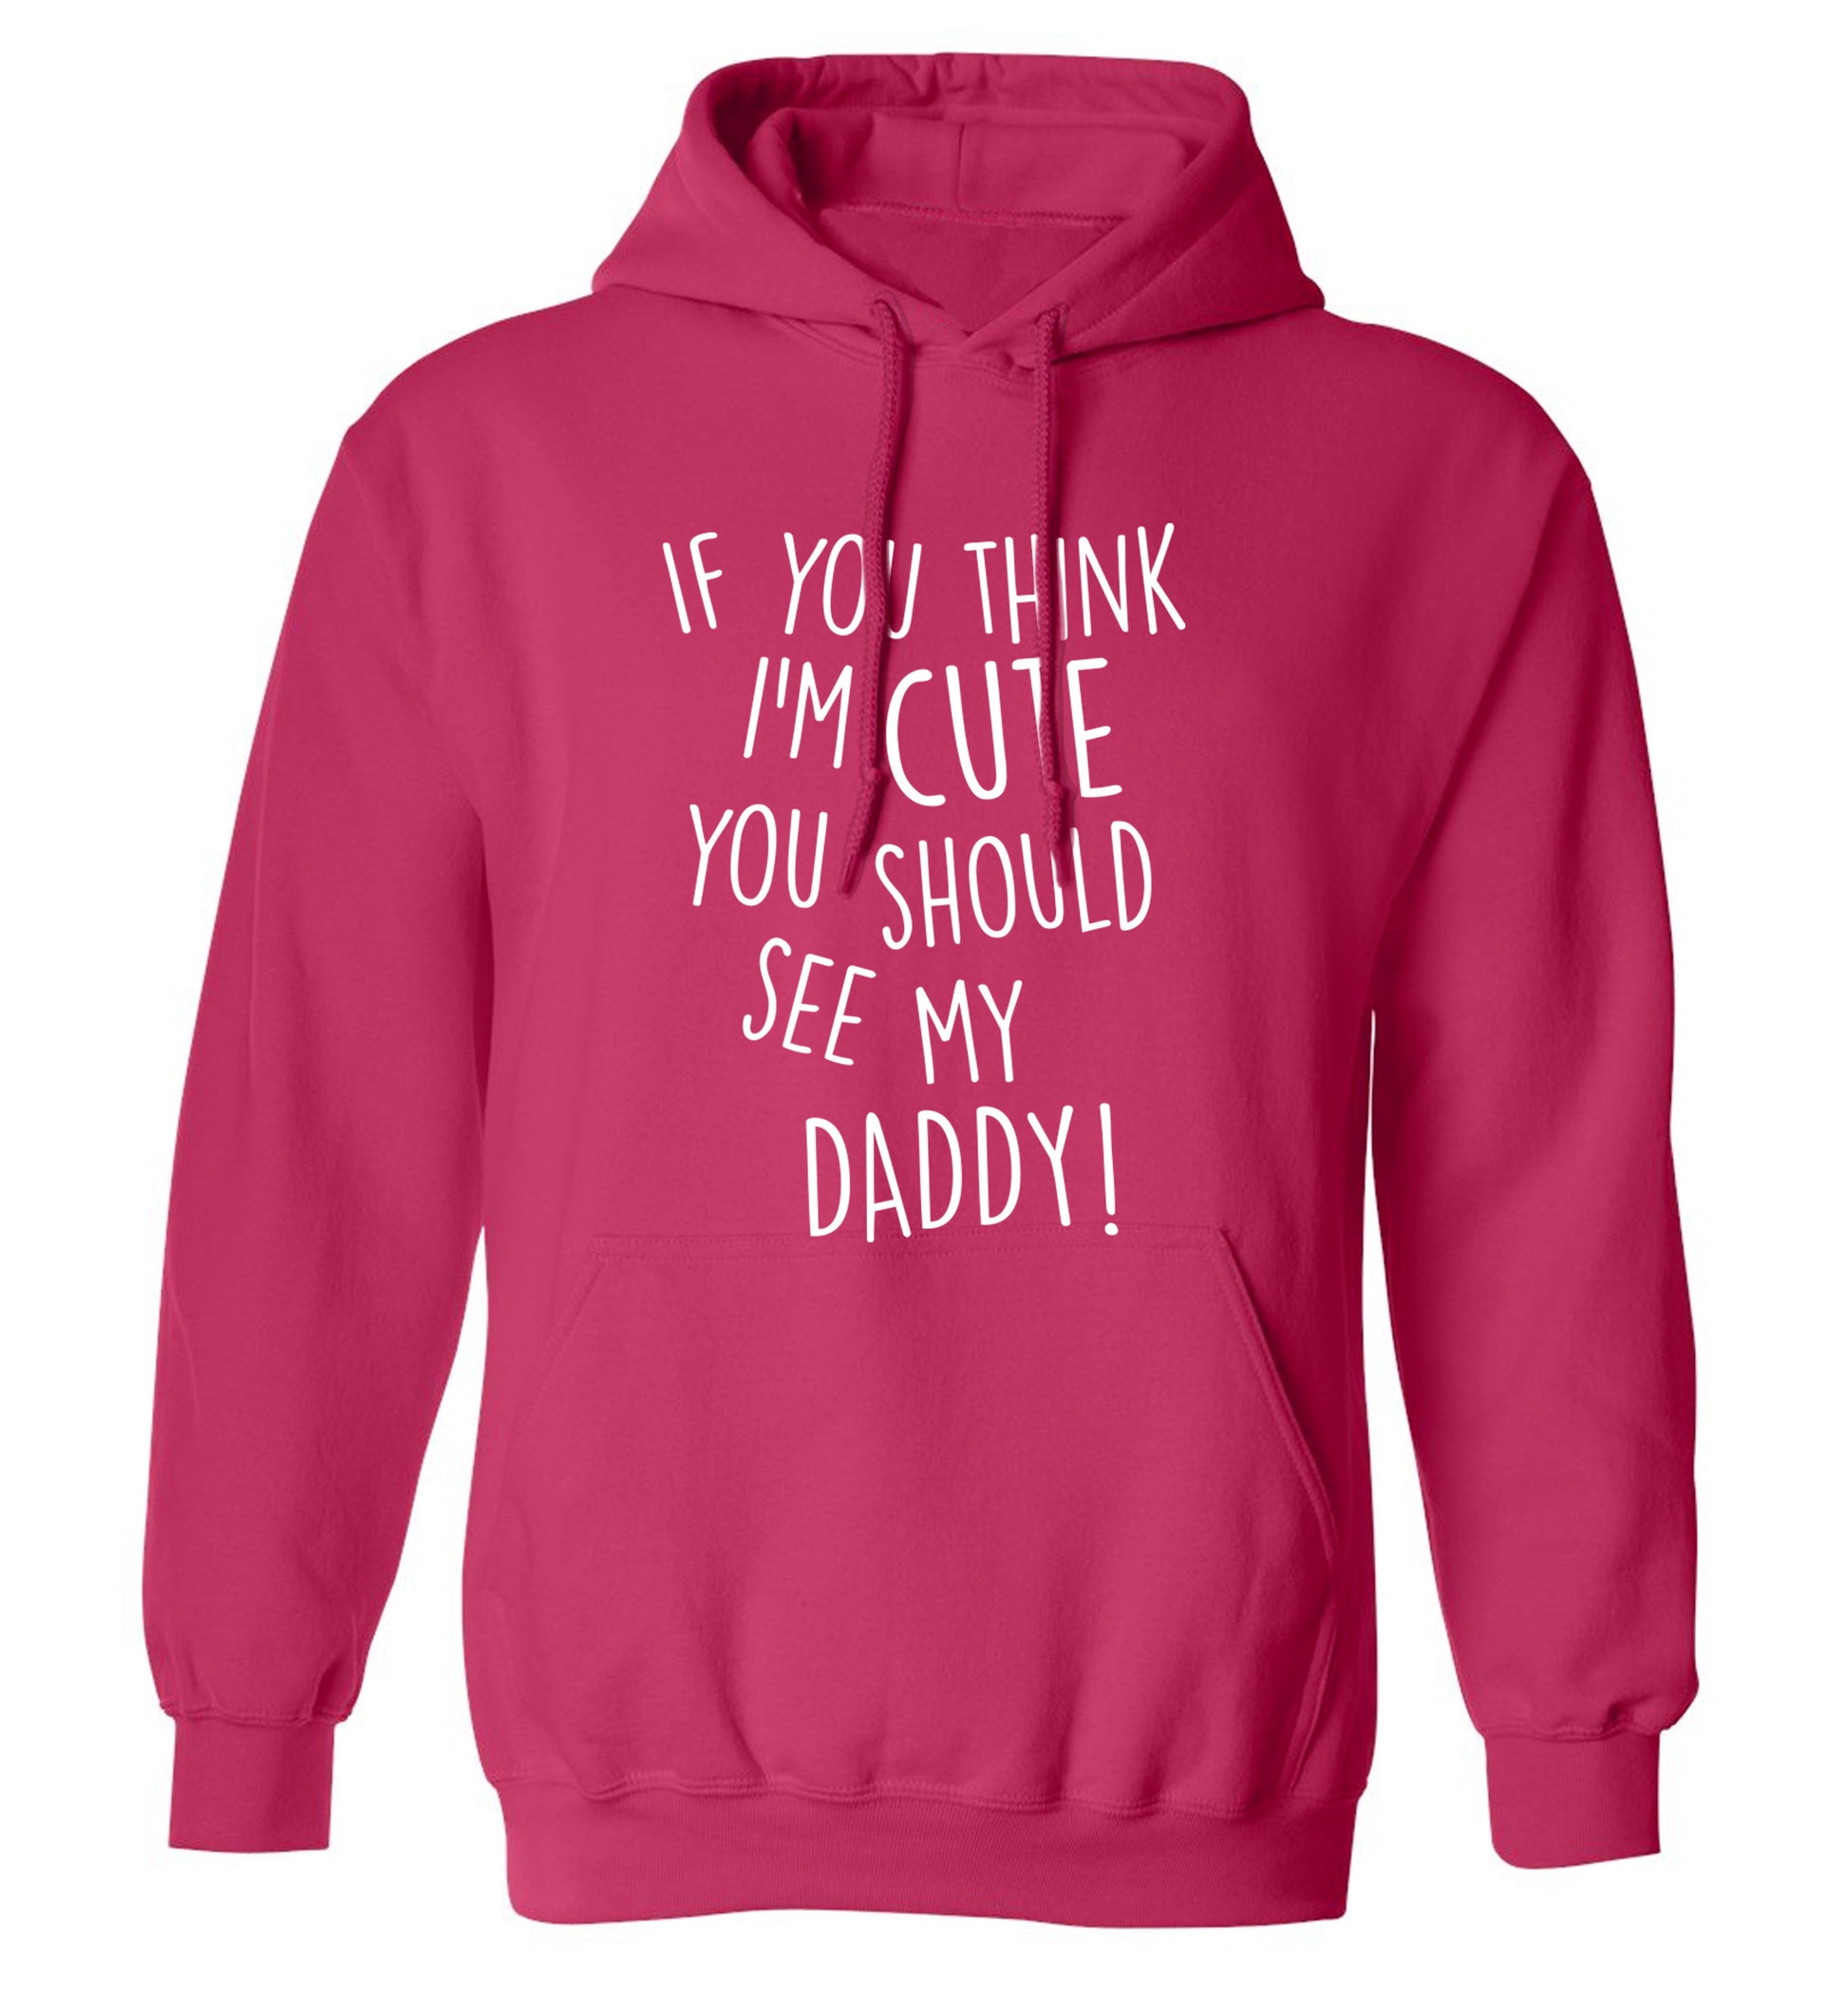 If you think I'm cute you should see my daddy adults unisex pink hoodie 2XL